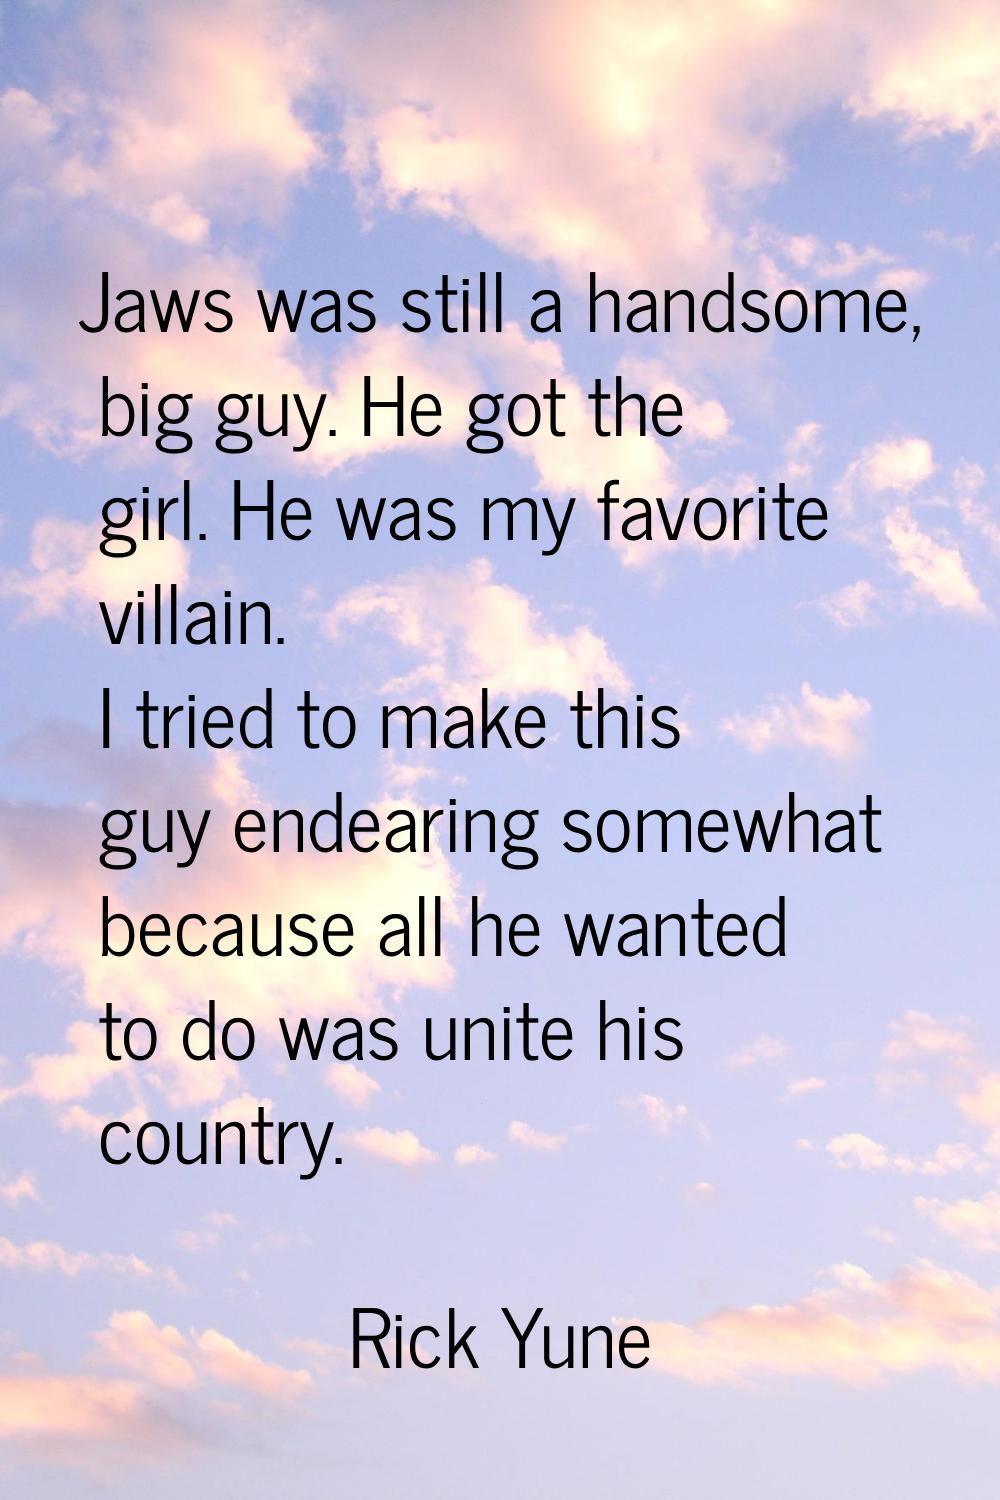 Jaws was still a handsome, big guy. He got the girl. He was my favorite villain. I tried to make th